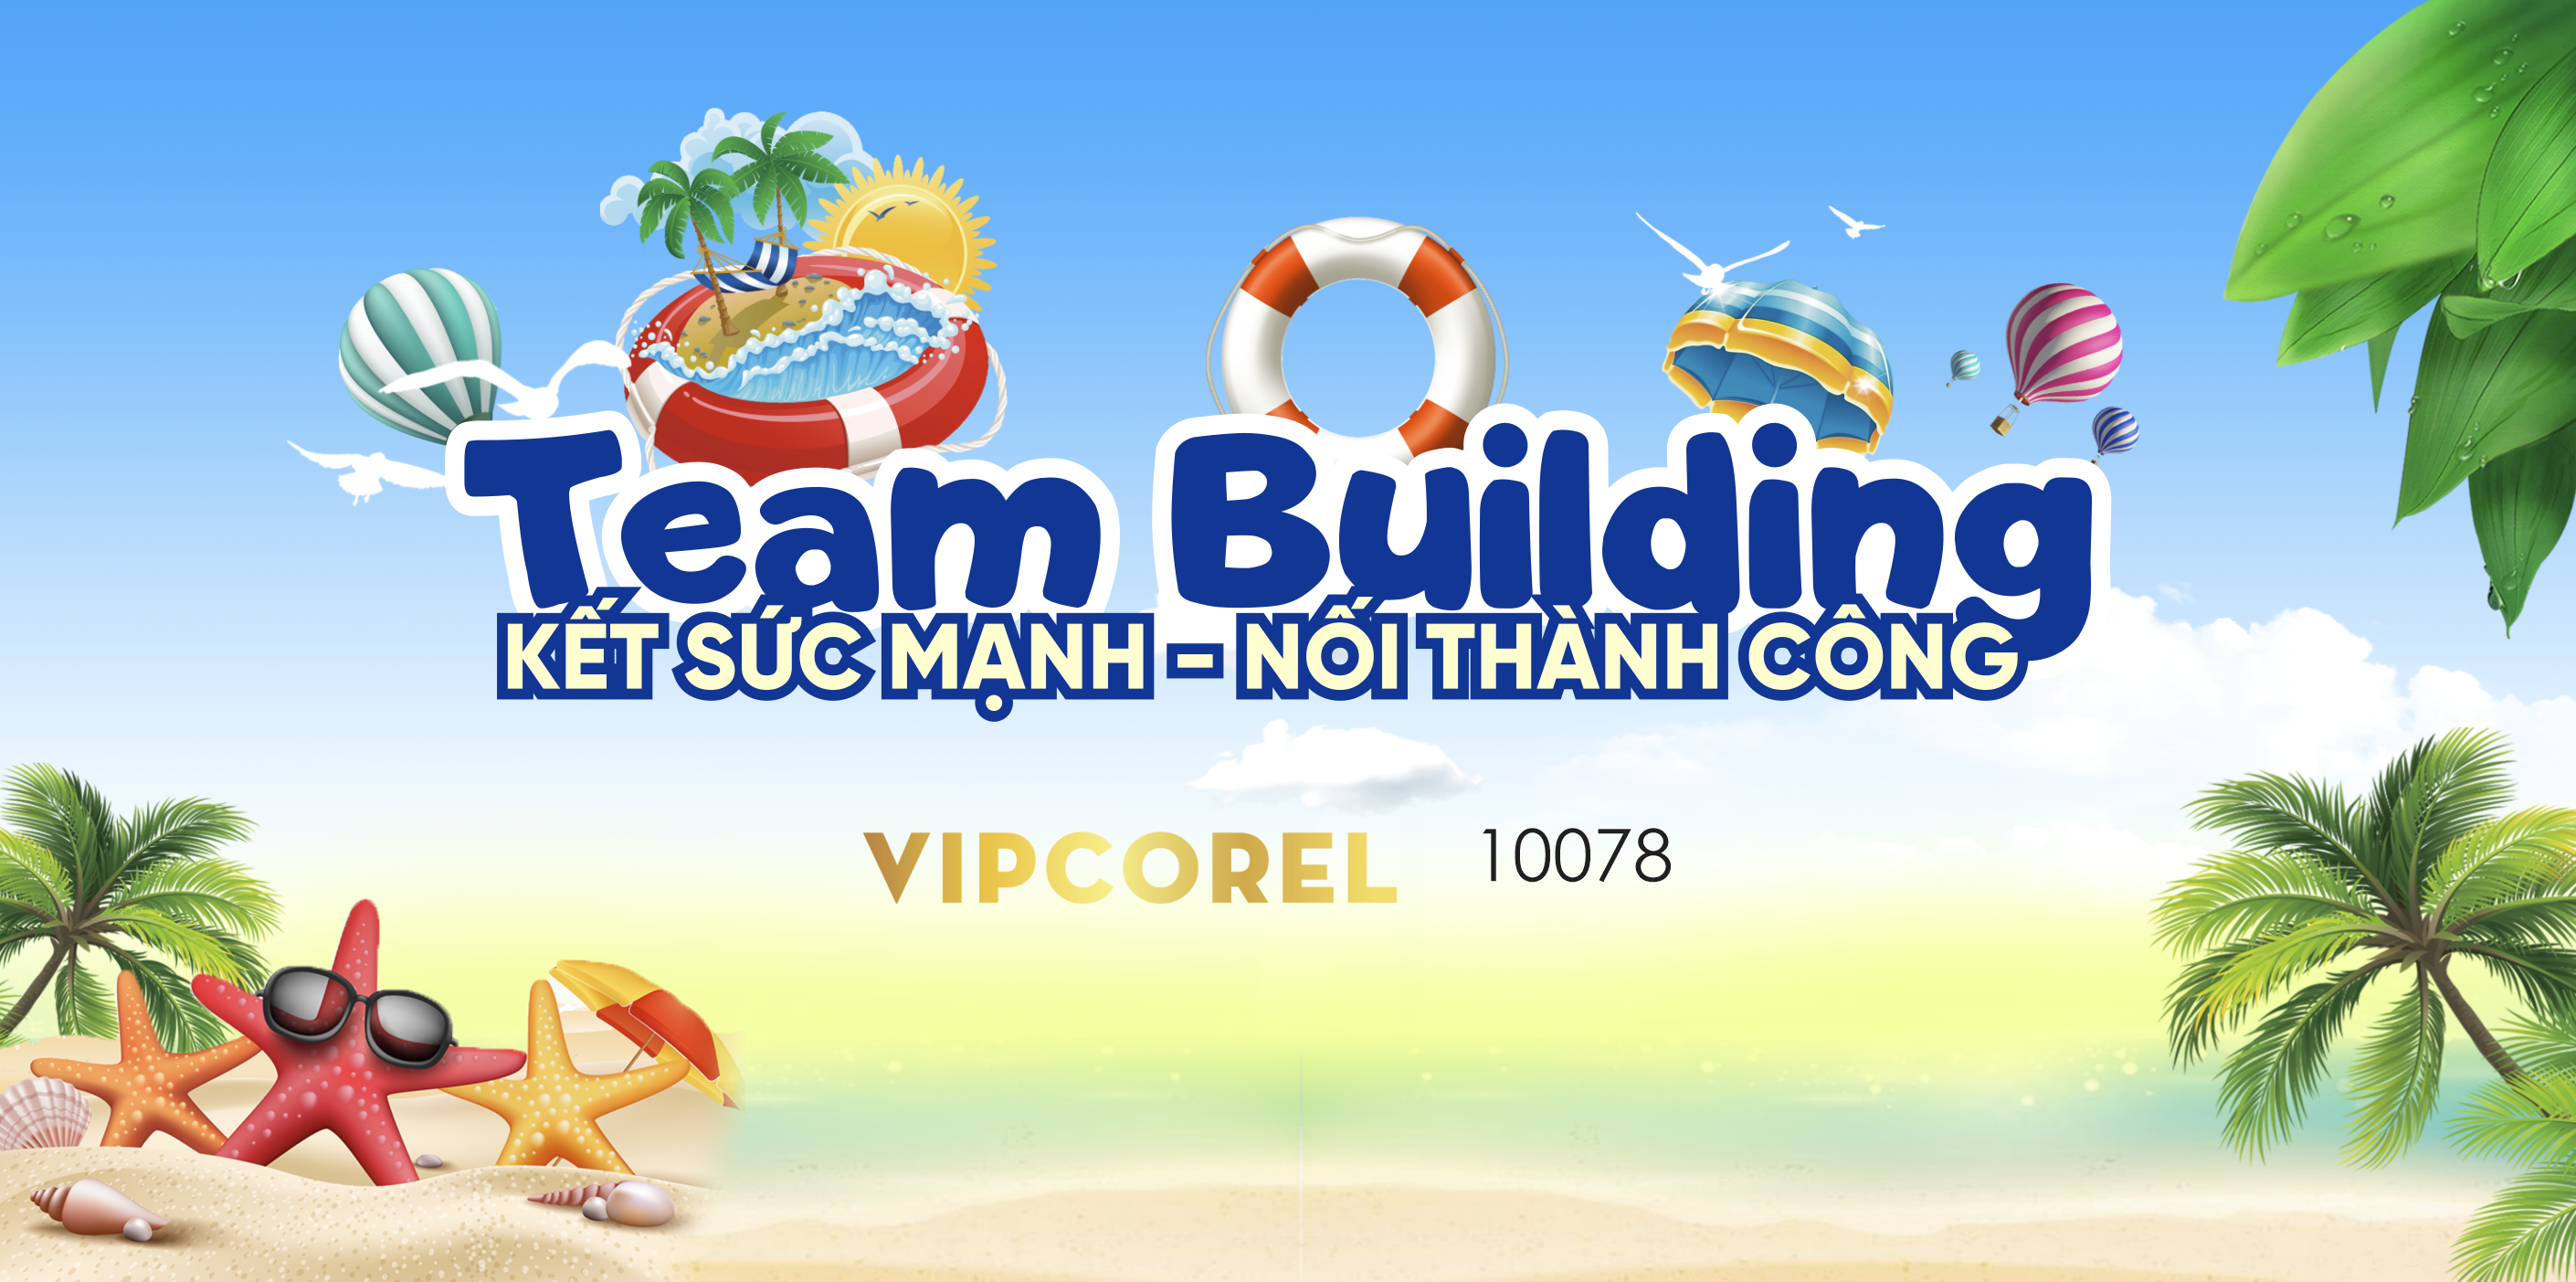 team building ket suc manh - noi thanh cong.png